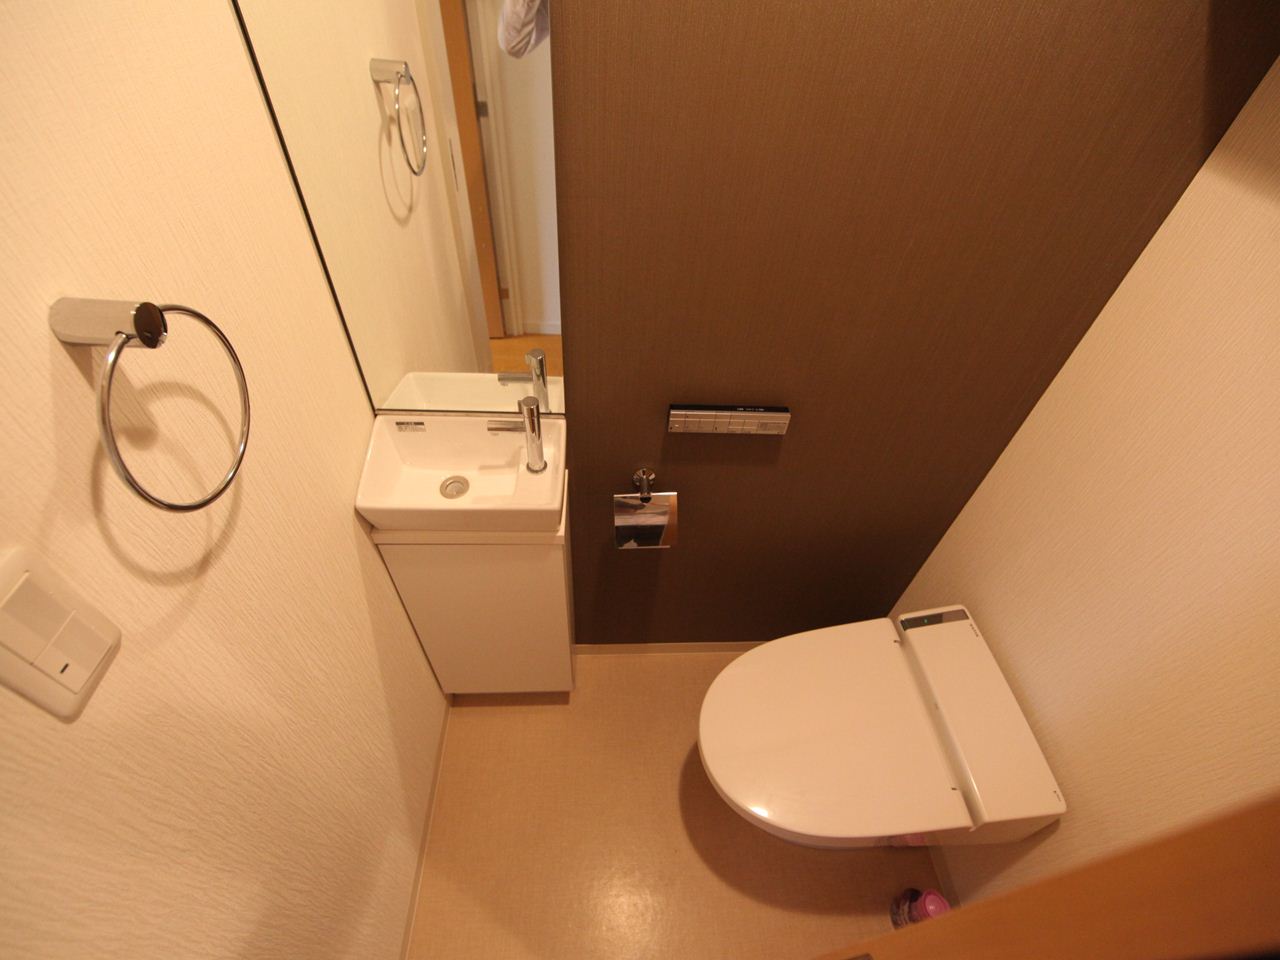 Toilet. Toilet (with washlet) shelf with with hand-washing facilities